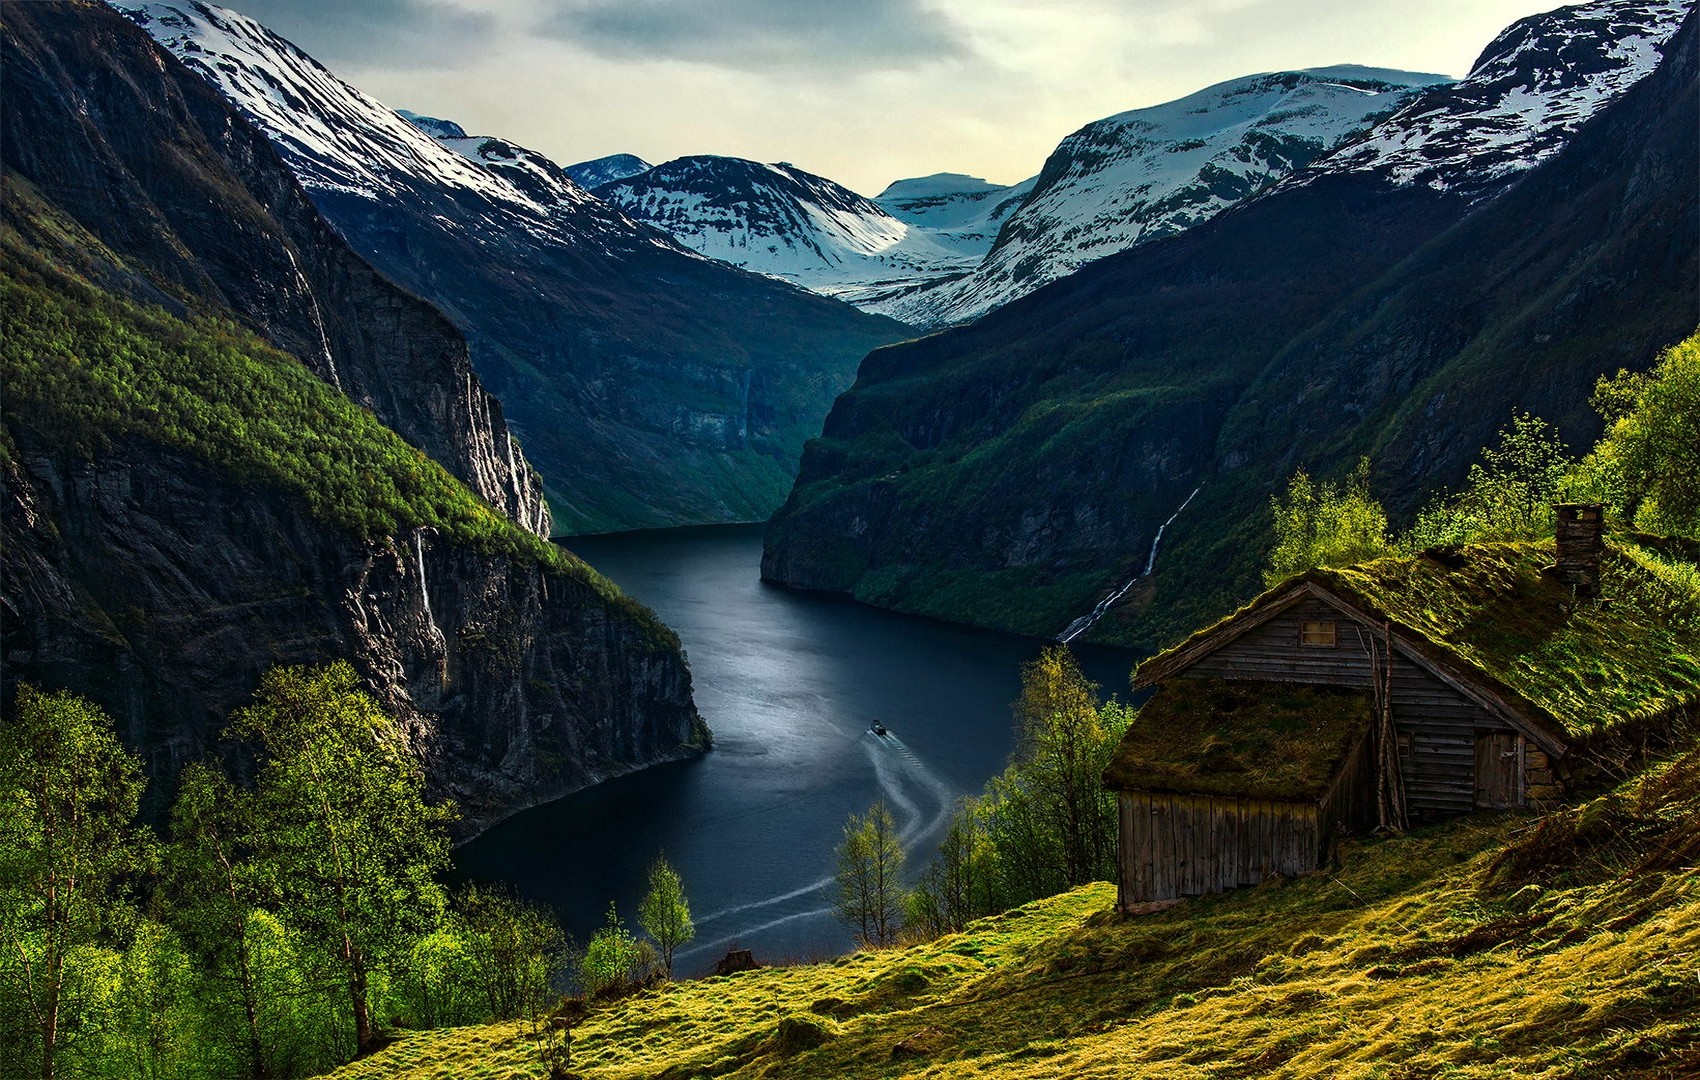 Nature Landscape Geiranger Fjord Norway Mountains Cabin Trees Morning Snowy Peak Boat Waterfall Gras 1700x1080